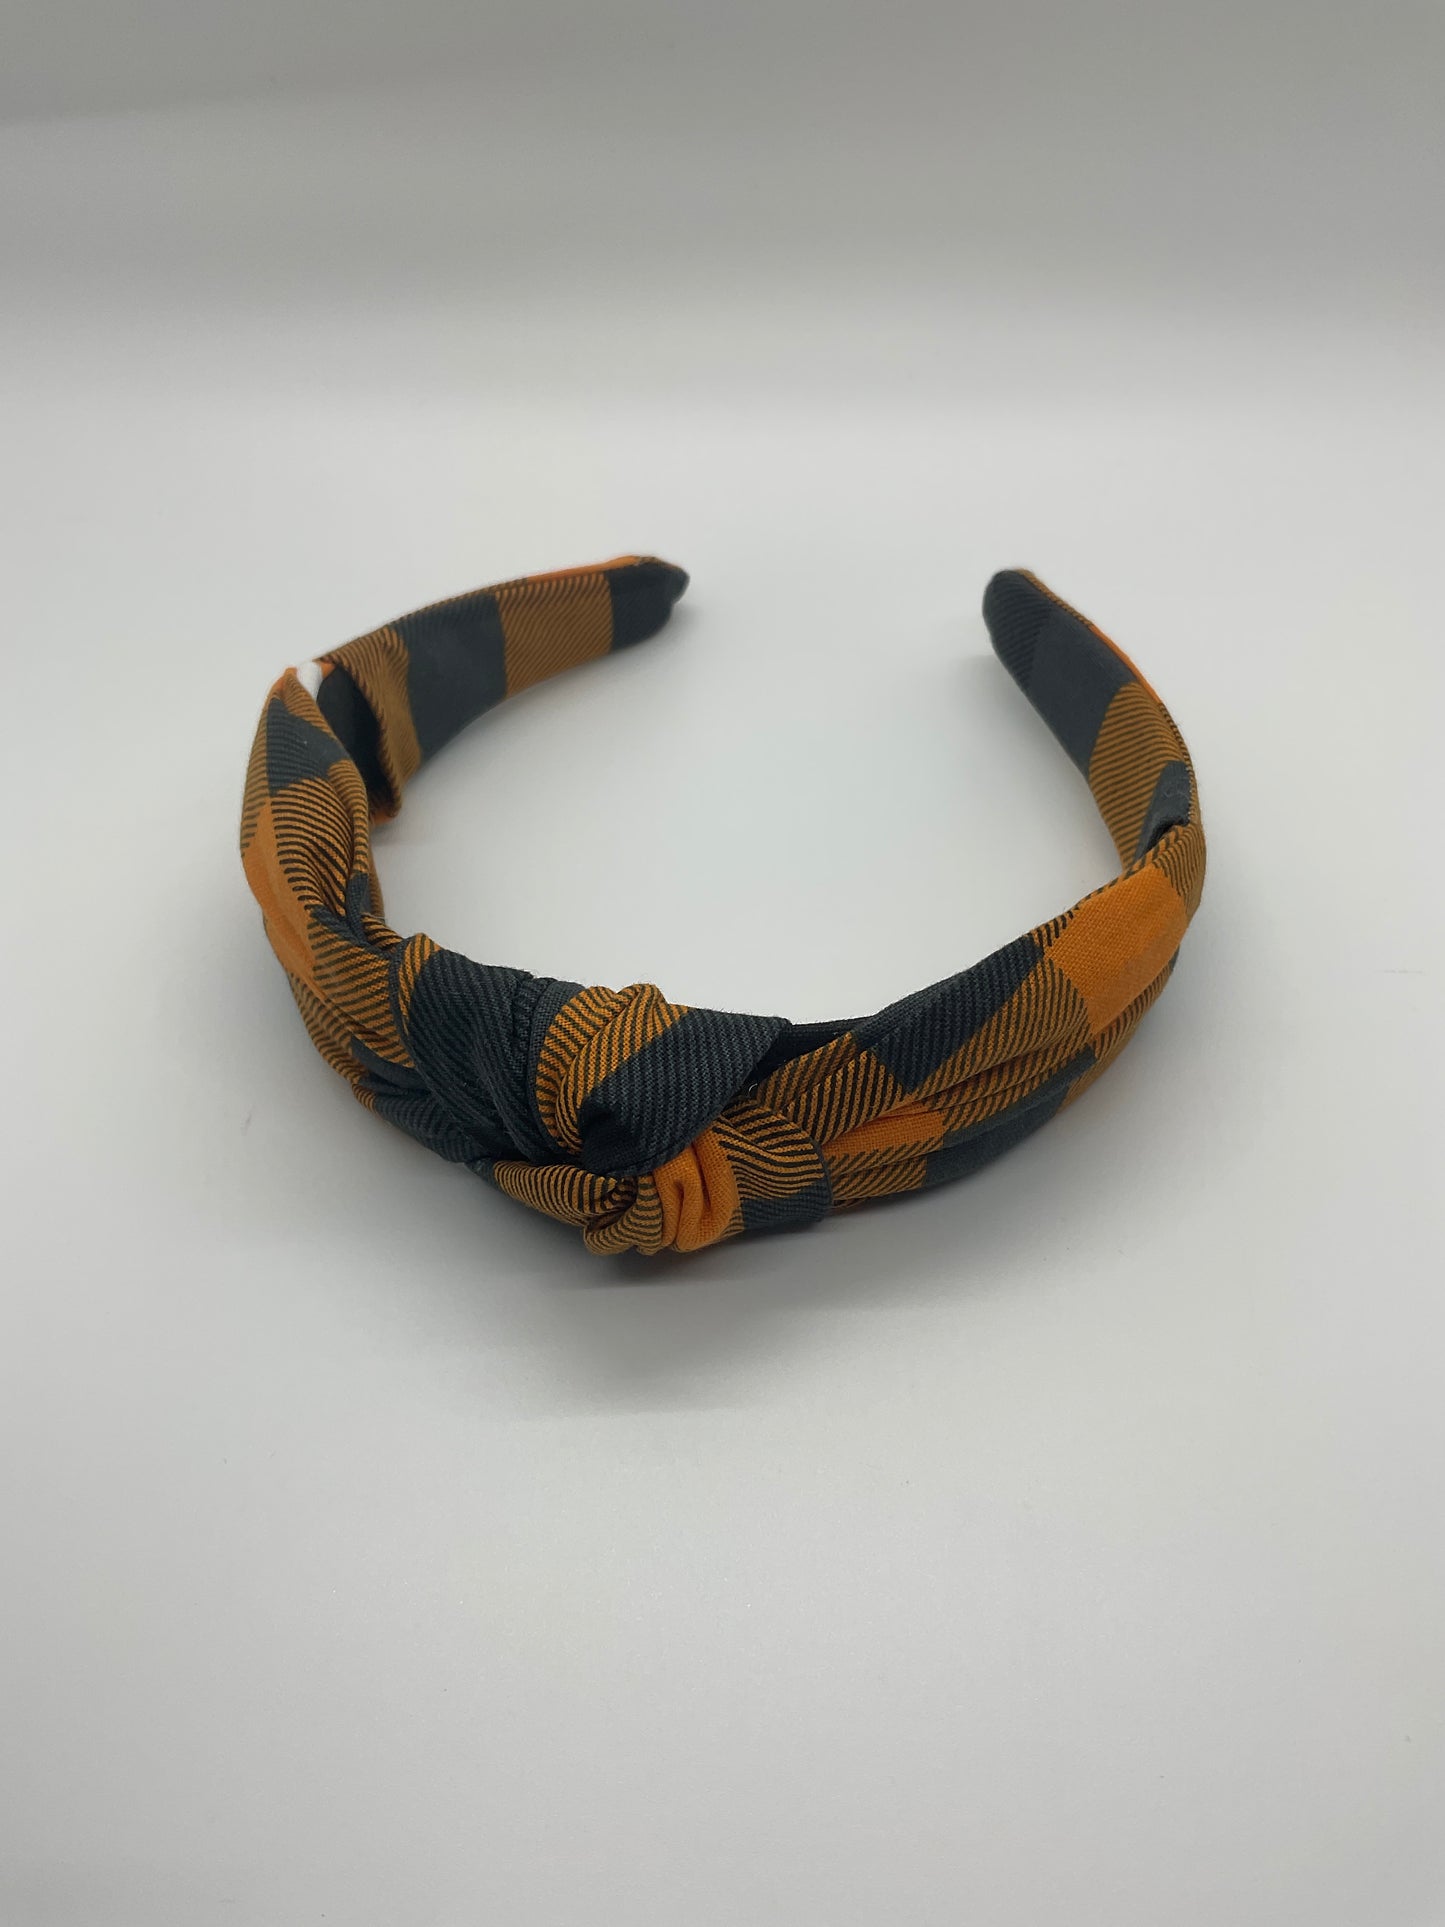 To the Pumkin patch knotted headband